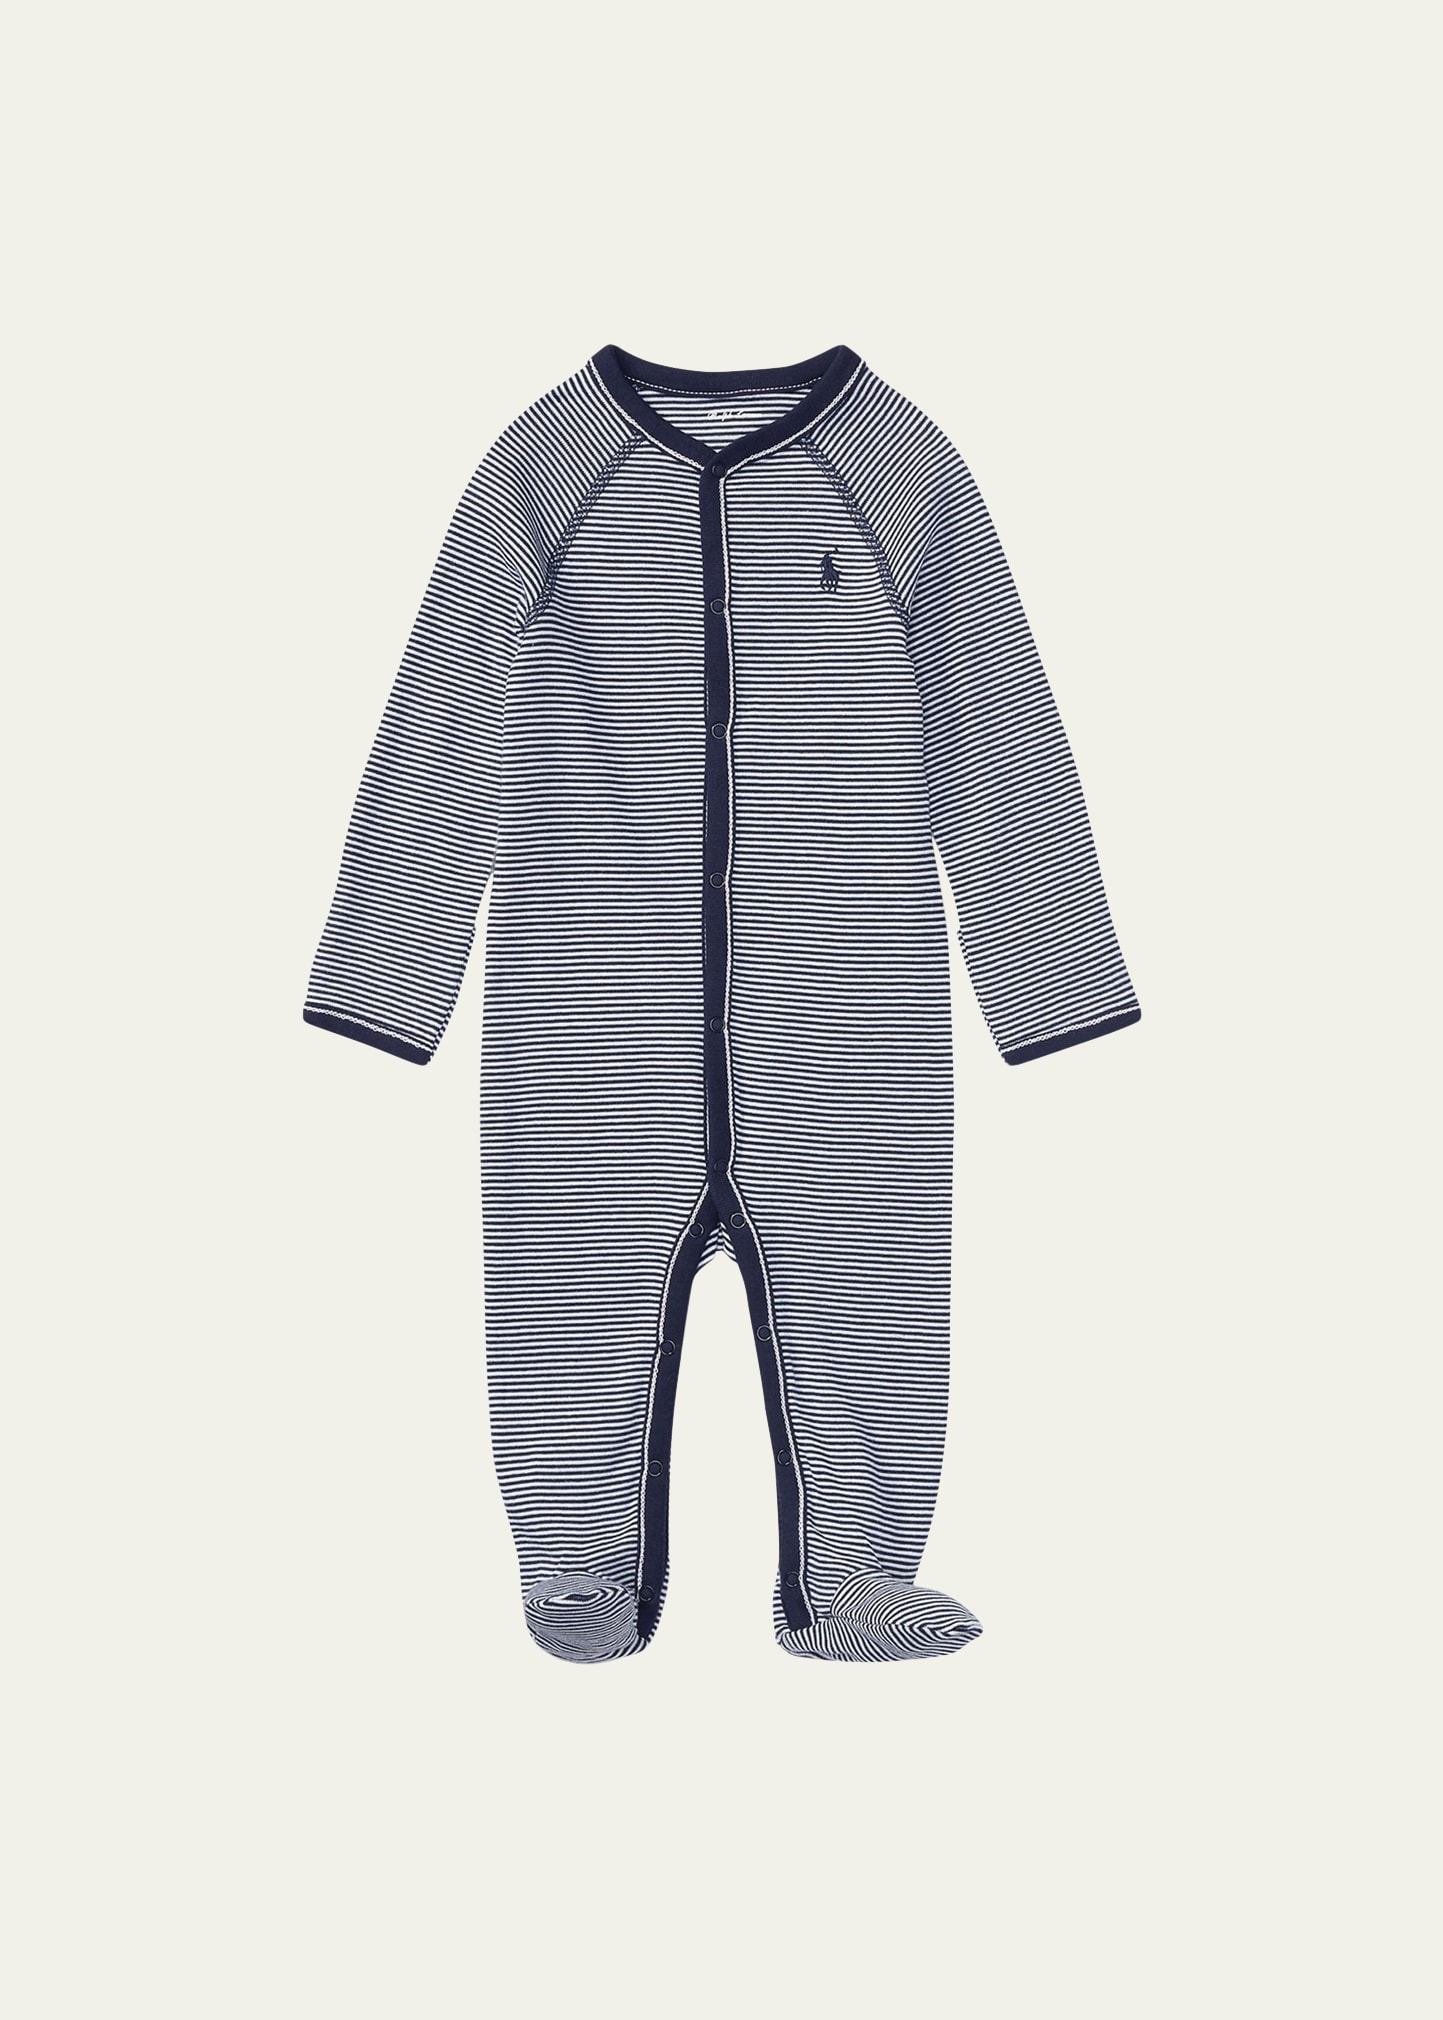 Yarn-Dyed Cotton Footie Coverall, Size Newborn-9 Months